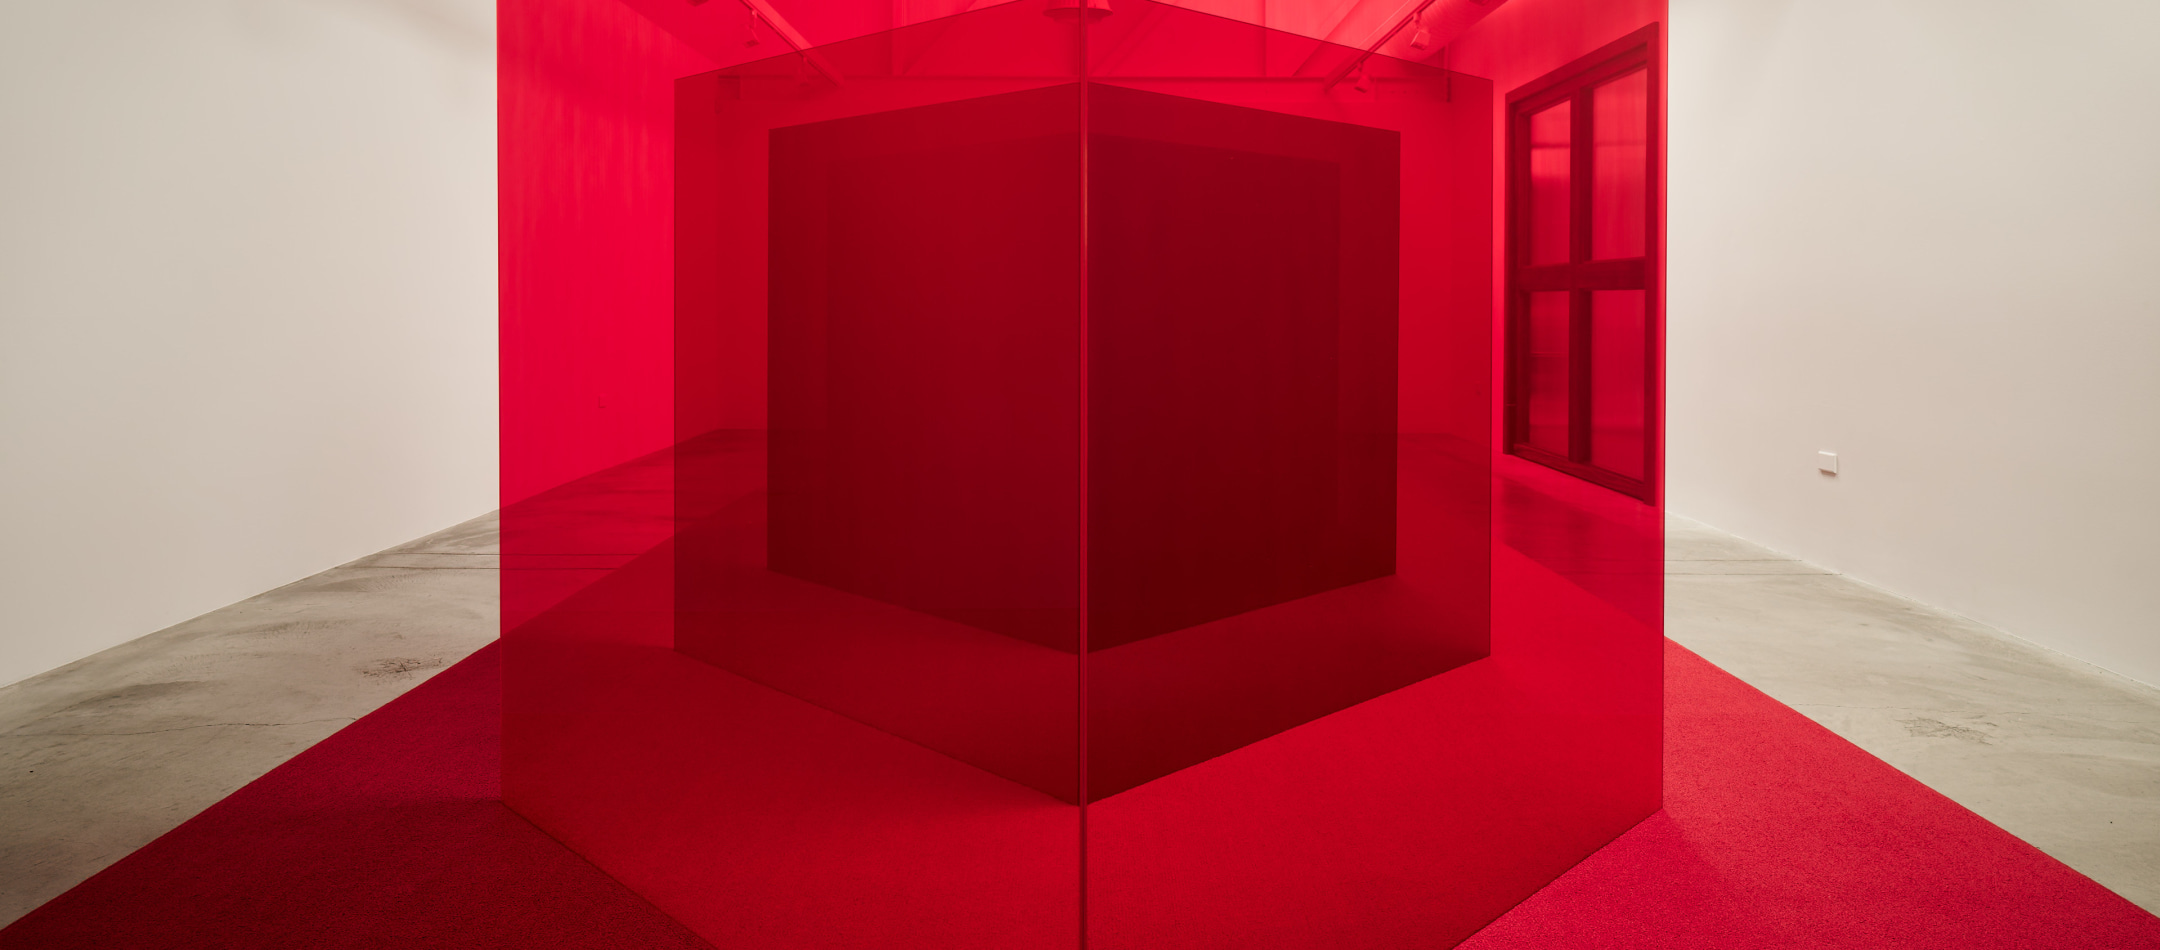 Larry Bell Pacific Red installation image at Anthony Meier gallery Mill Valley 2024 by Matthew Millman